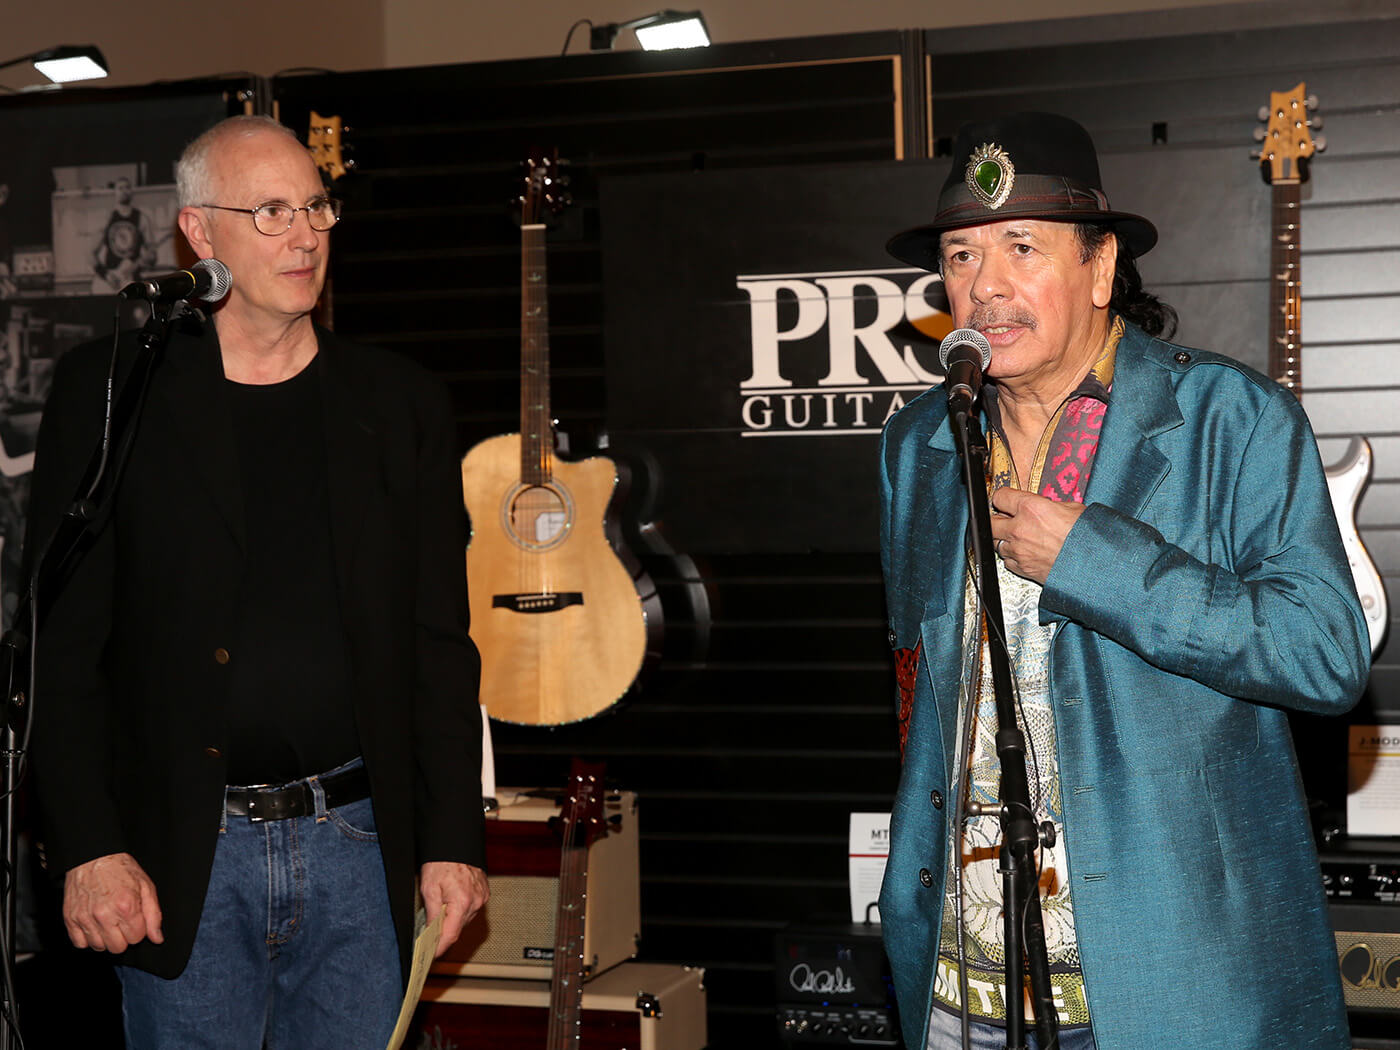 Paul Reed Smith and Carlos Santana speak at the PRS booth during the 2019 NAMM Show opening day at the Anaheim Convention Center on January 24, 2019 in Anaheim, California.